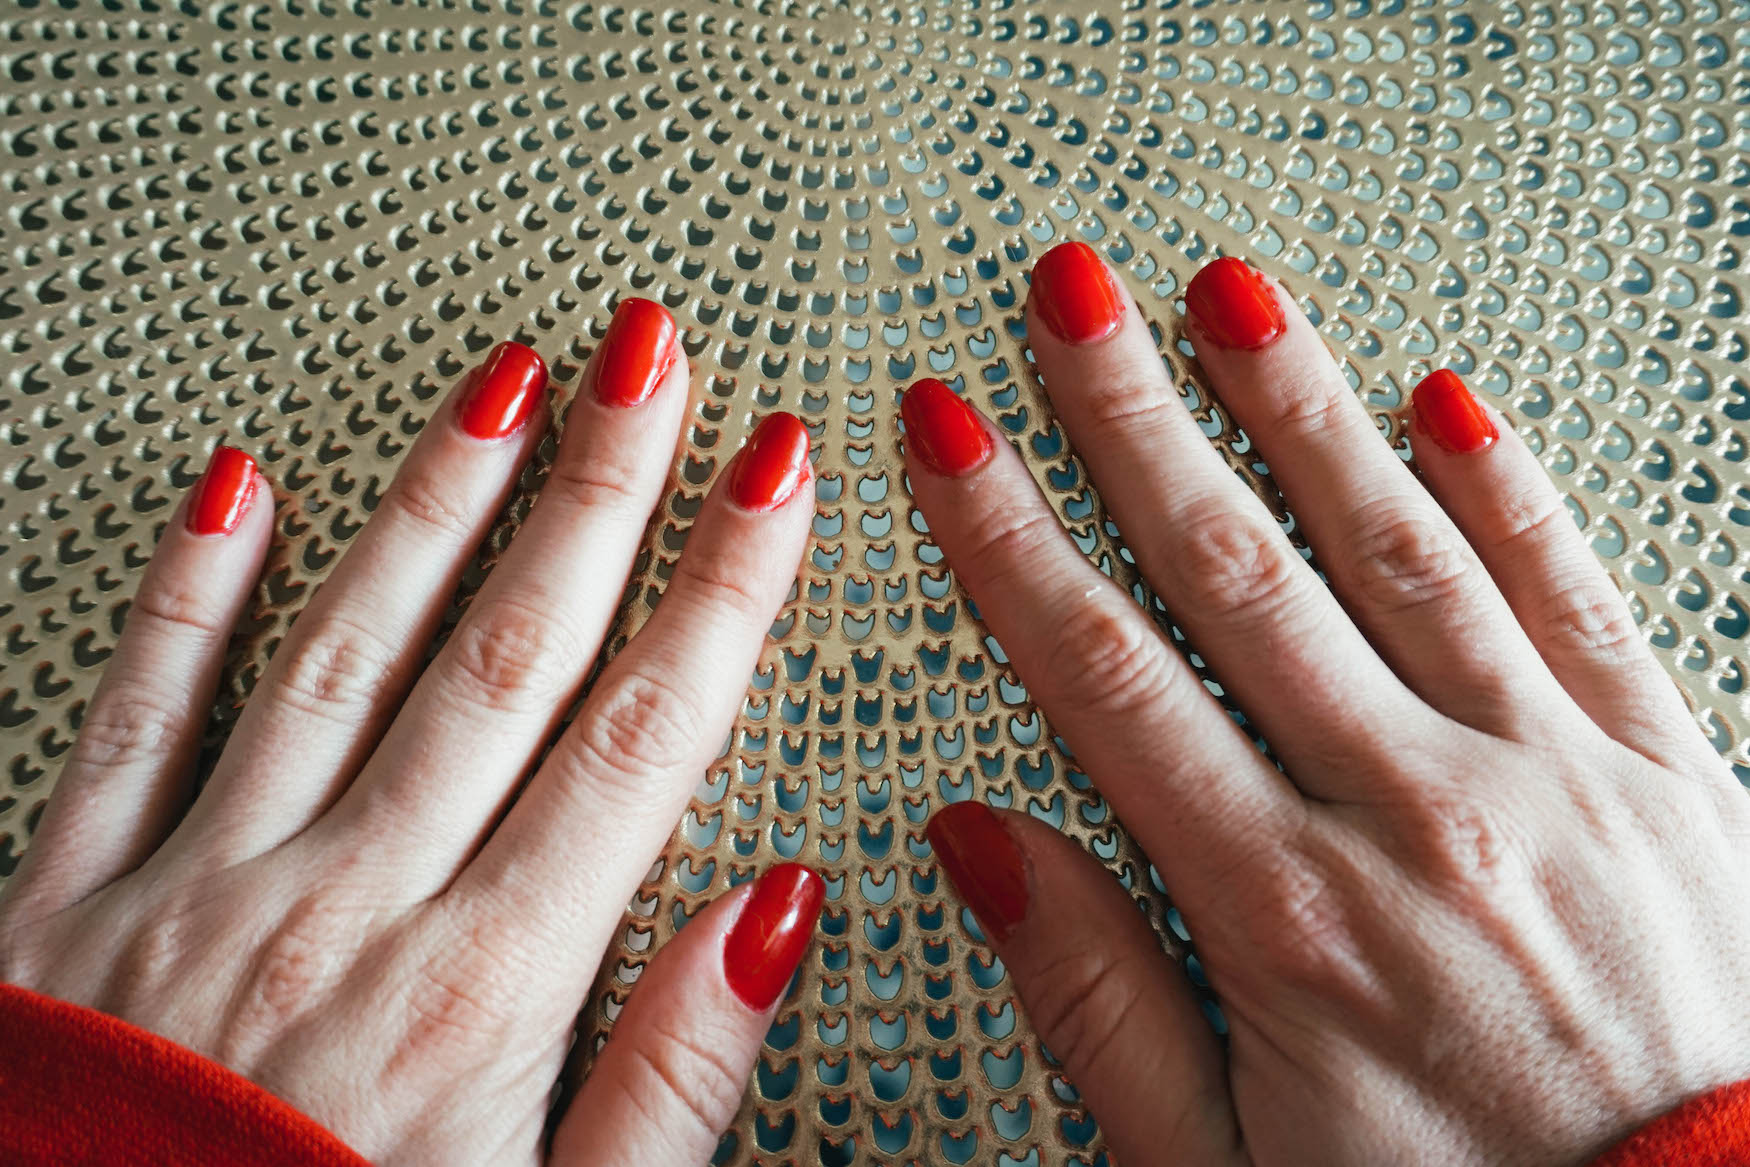 AT HOME GEL MANICURE TIPS - FASHION IN FLIGHT